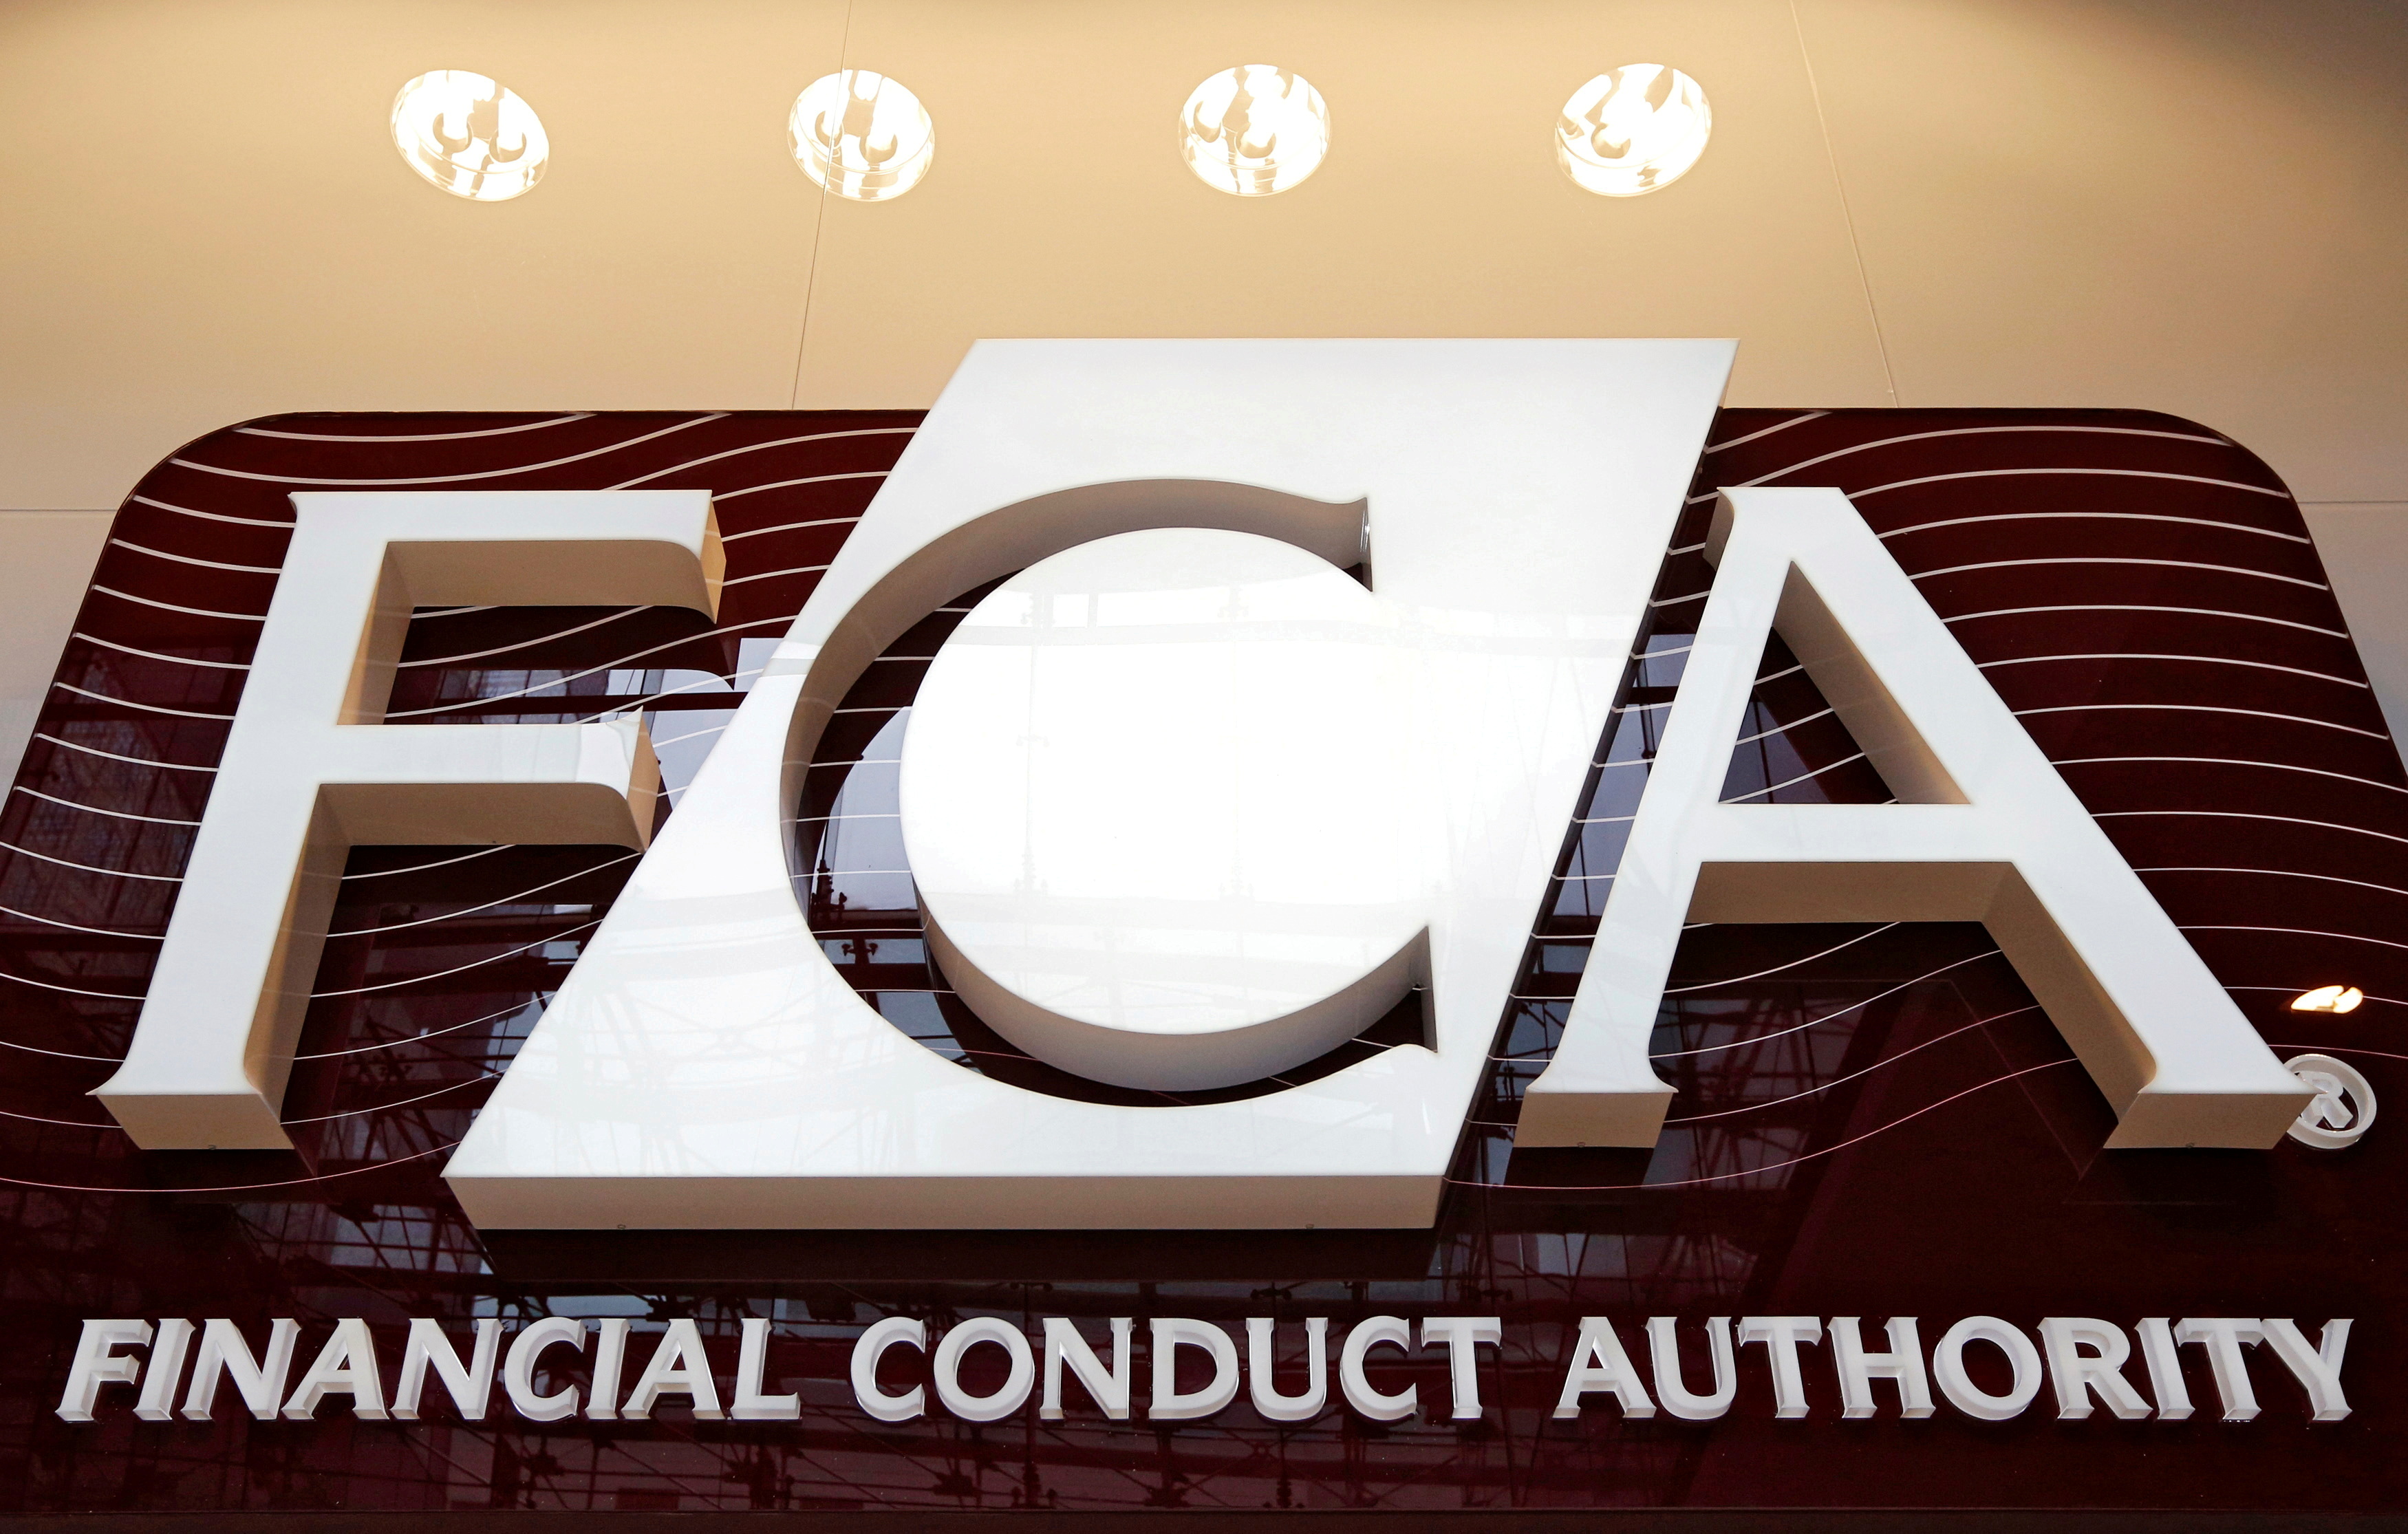 The logo of the new Financial Conduct Authority is seen at the agency's headquarters in the Canary Wharf business district of London